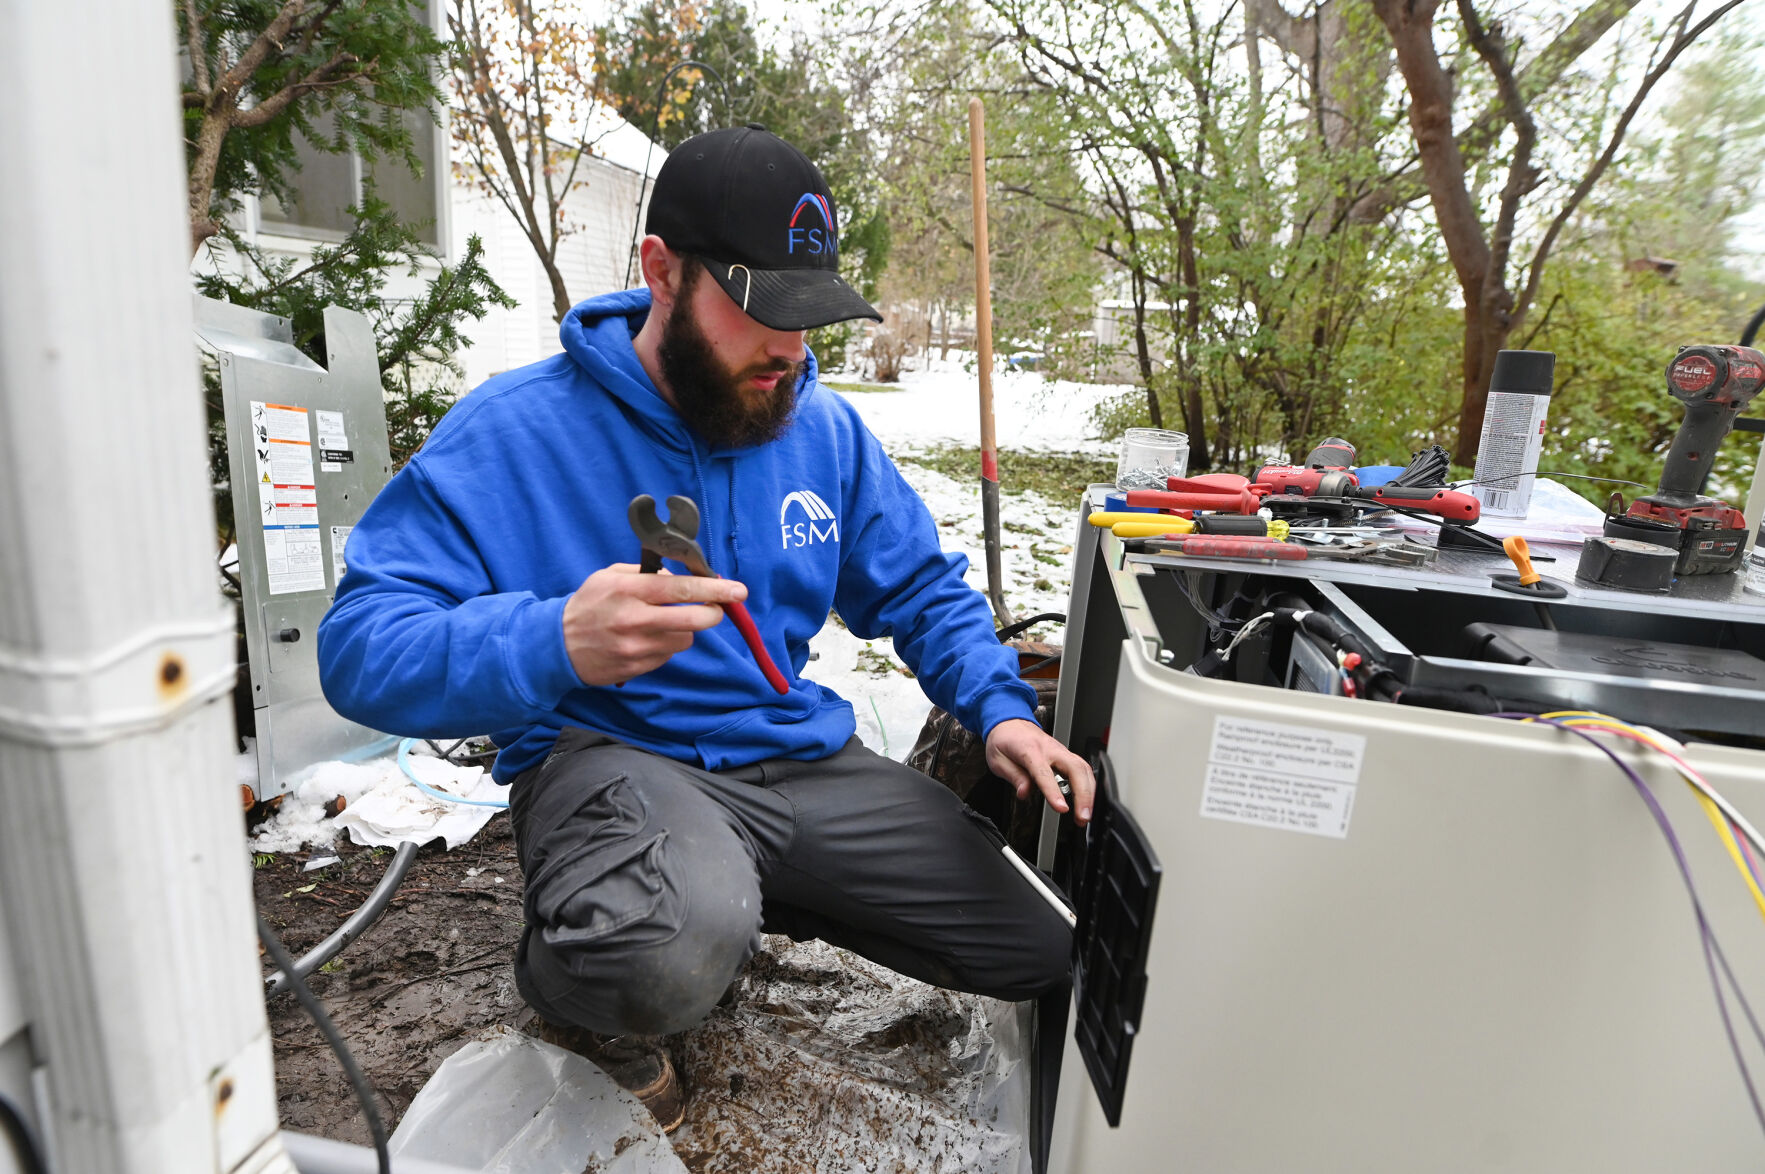 Chris Buckner, electrician, Foundation Systems Michigan, installs a Cummins whole house generator in Ypsilanti, Mich., as increasing demand for generators and as people work from home and following this summer